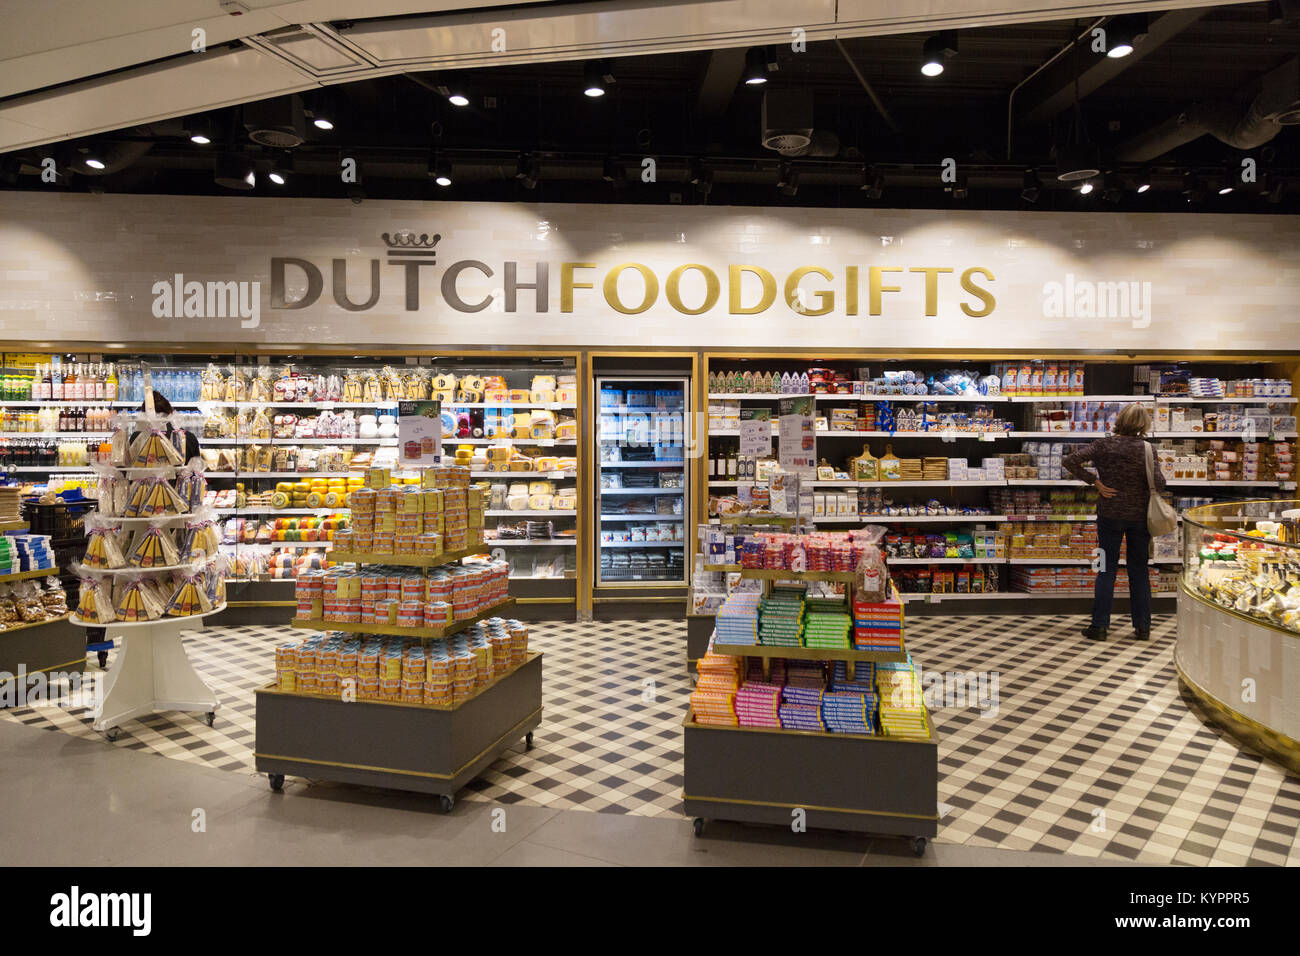 Dutch Food Gifts - a duty free shop in Amsterdam Schiphol Airport, Amsterdam, Netherlands, Europe Stock Photo